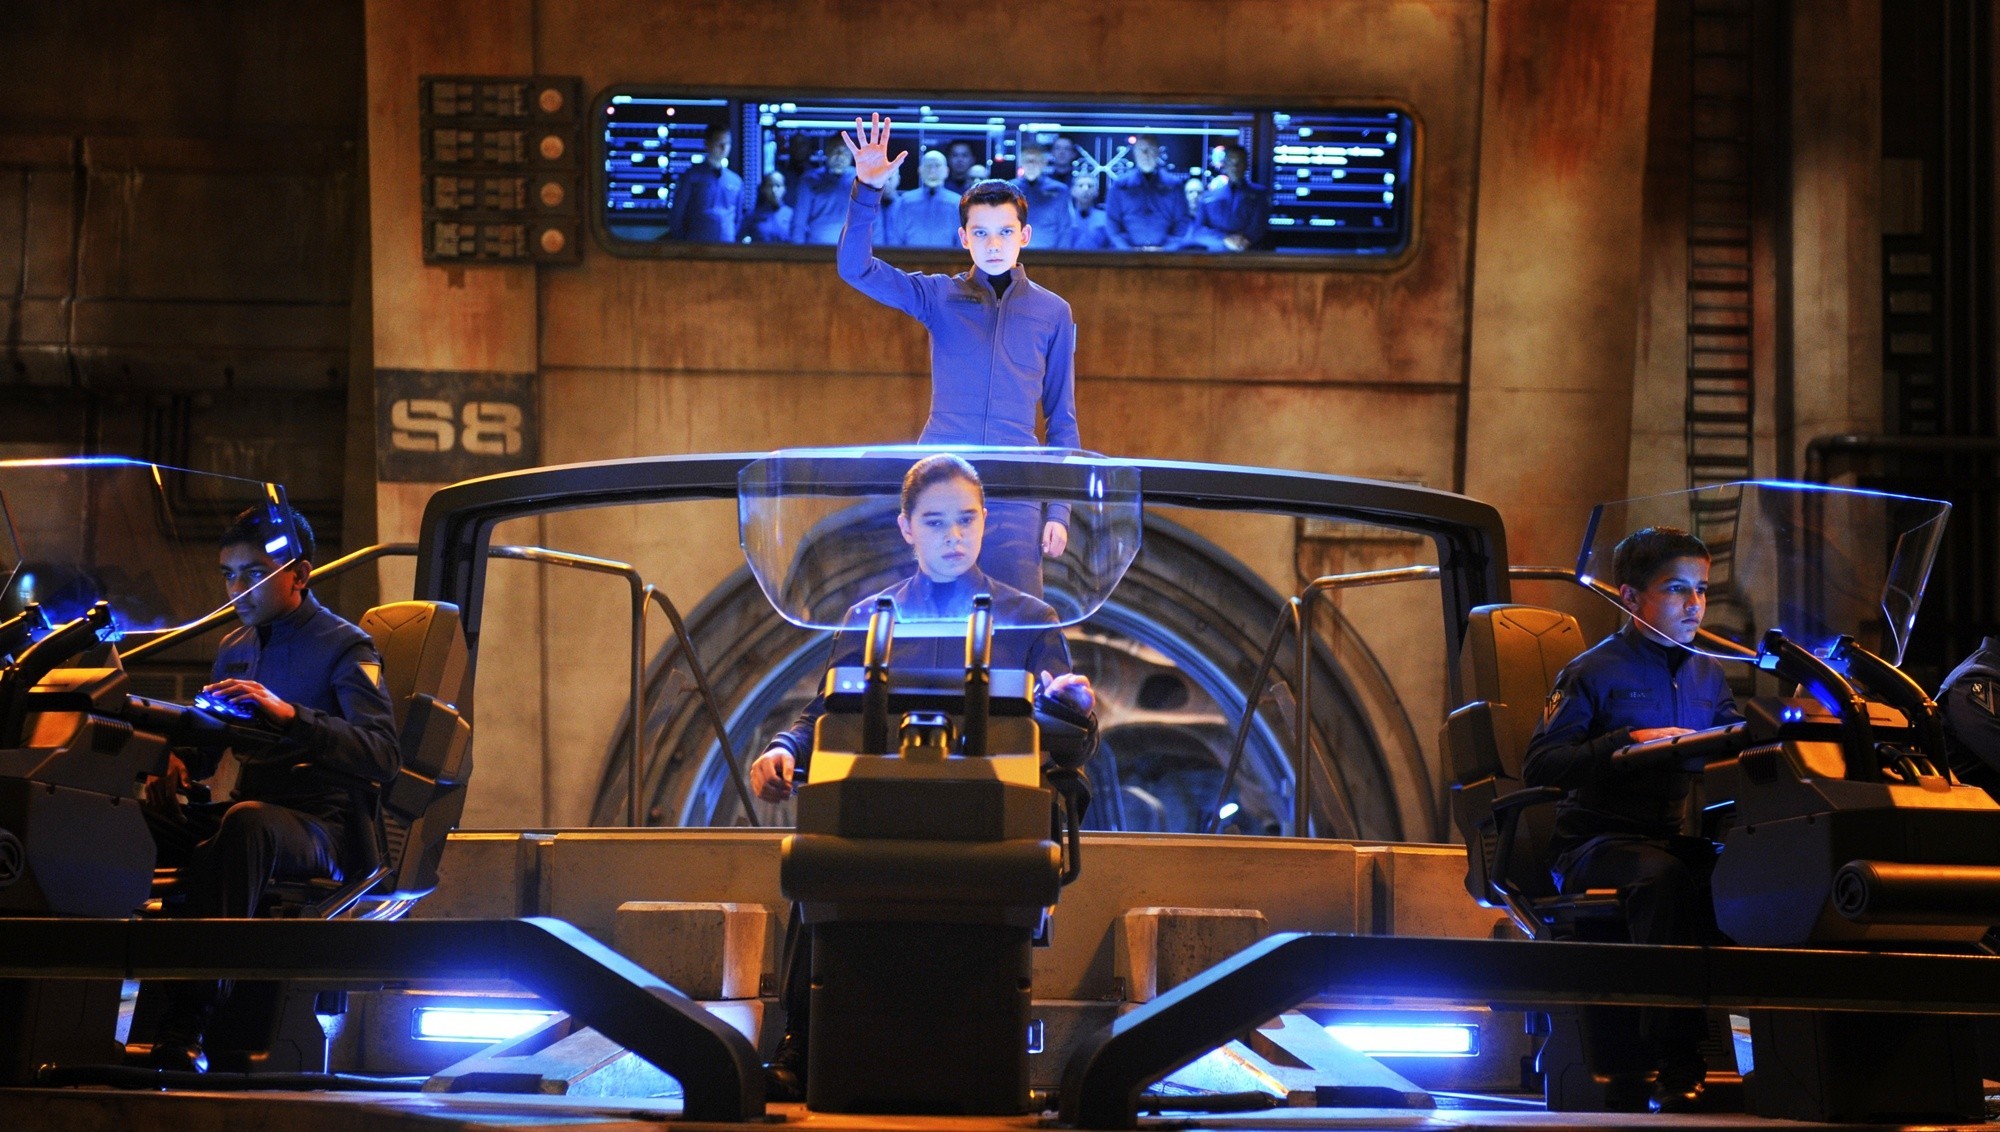 Asa Butterfield stars as Ender Wiggin and Hailee Steinfeld stars as Petra Arkanian in Summit Entertainment's Ender's Game (2013). Photo credit by Richard Foreman.